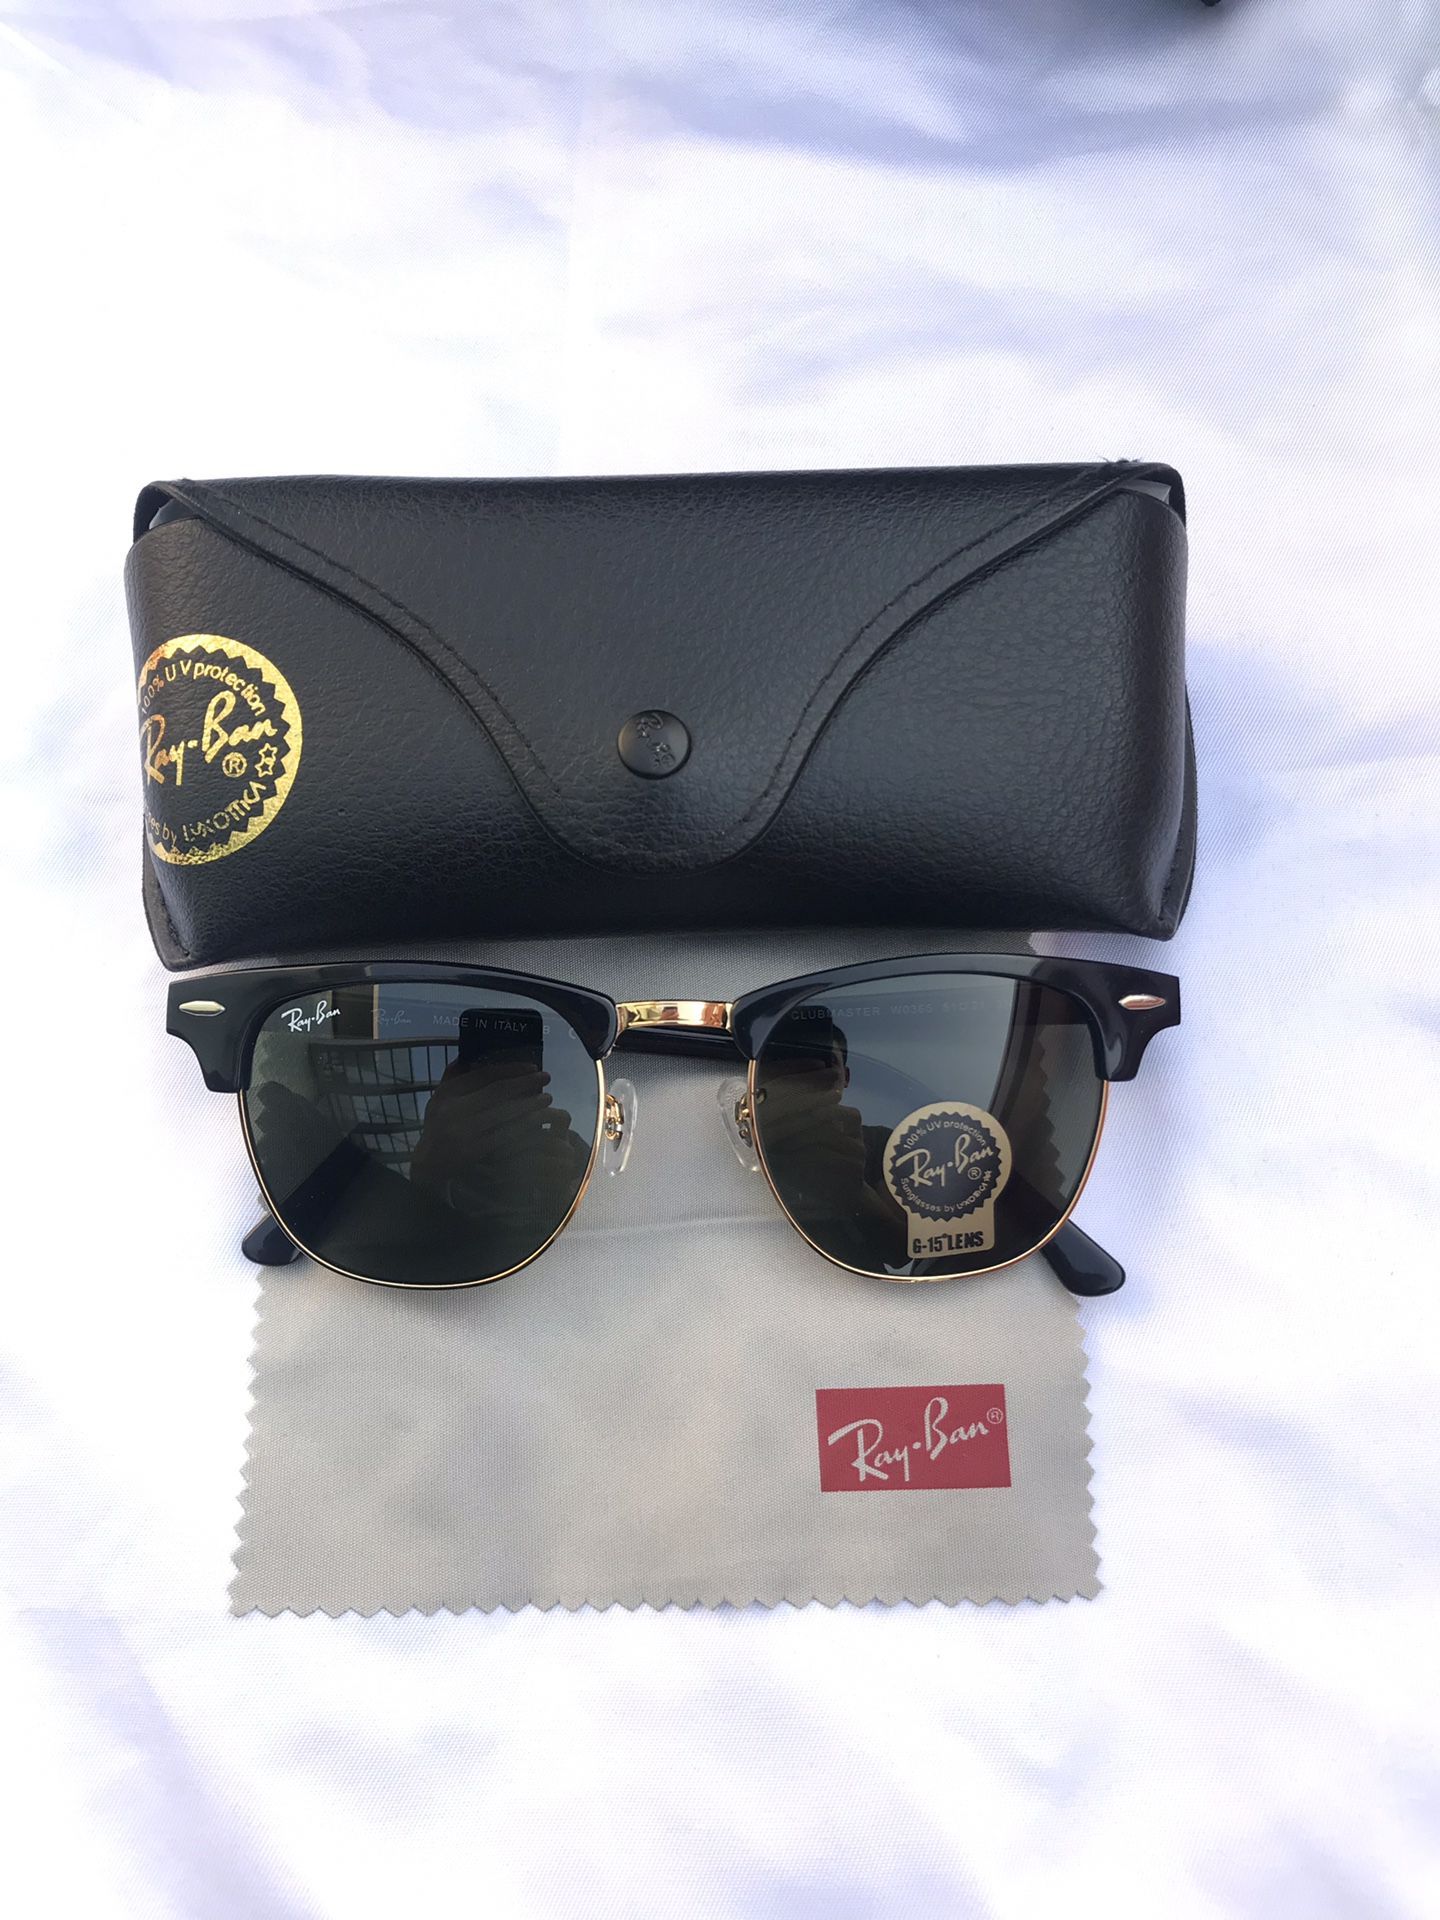 Ray ban clubmaster 3016 sunglasses